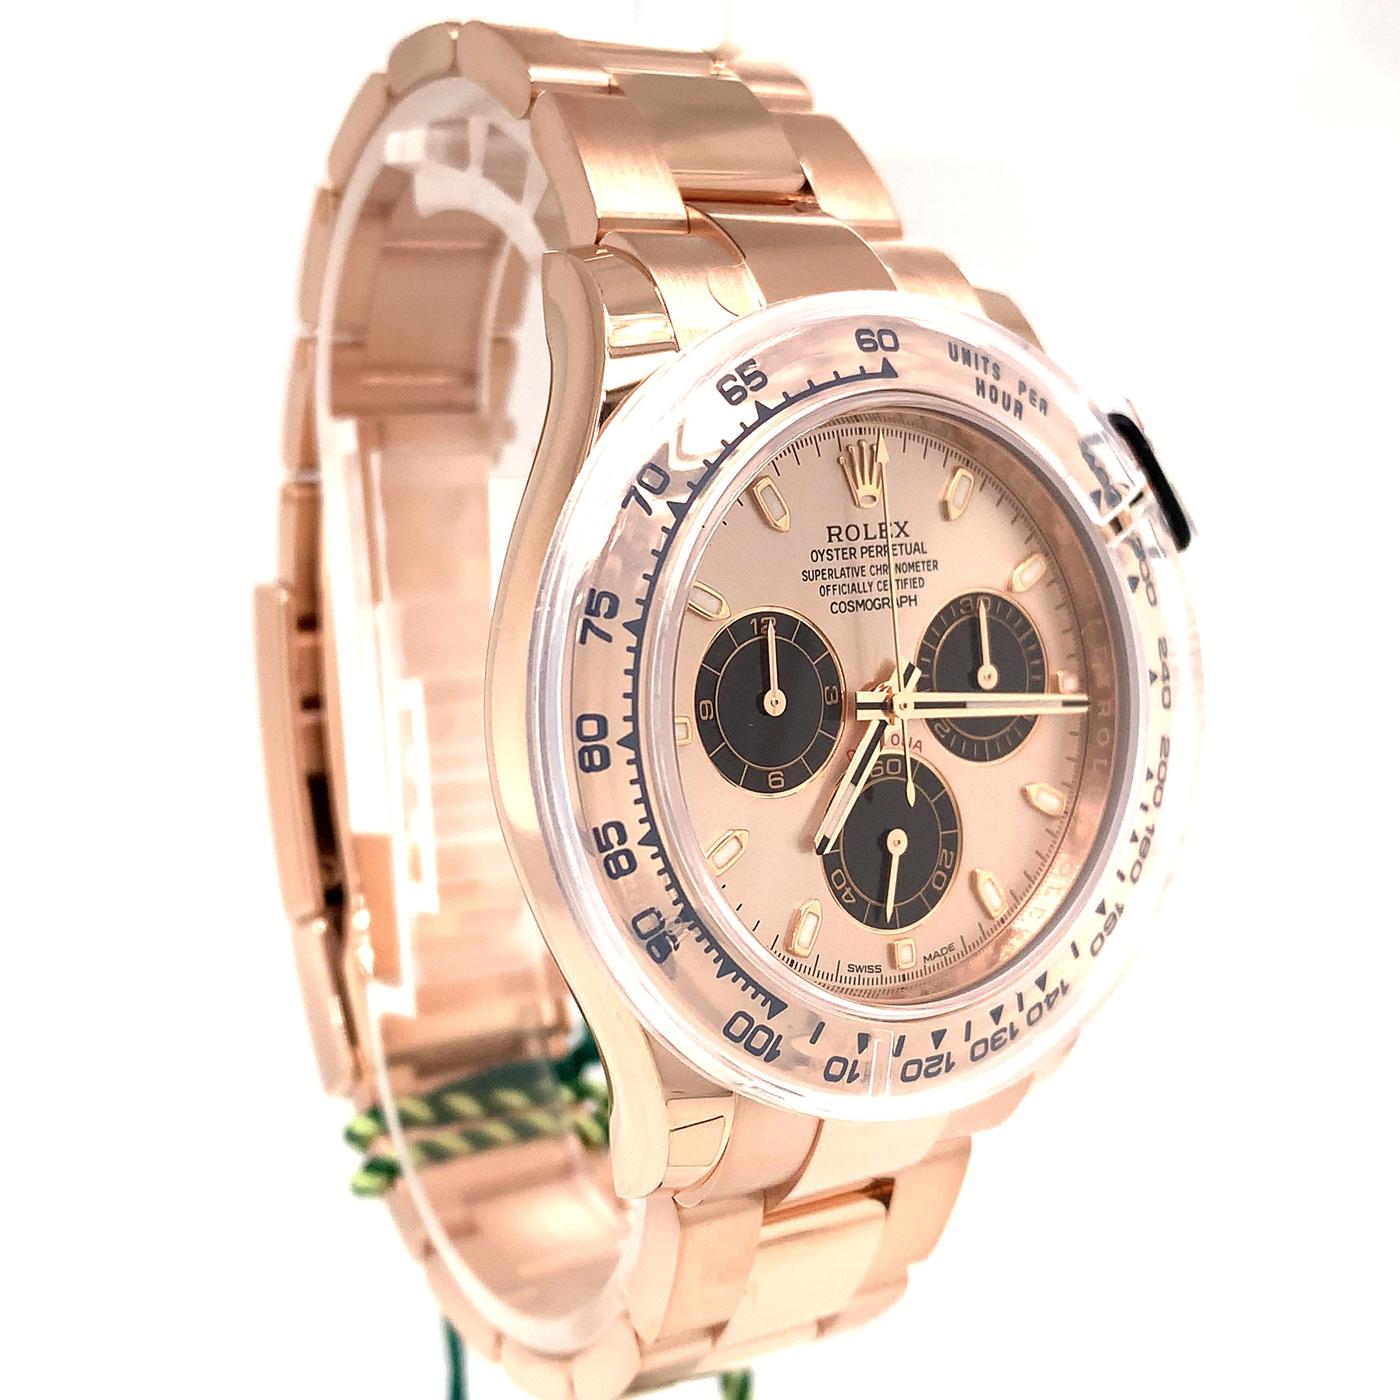 Daytona Rose Gold Pink Panda Dial Oyster Perpetual Cosmograph Mens Watch 116505 For Sale 2